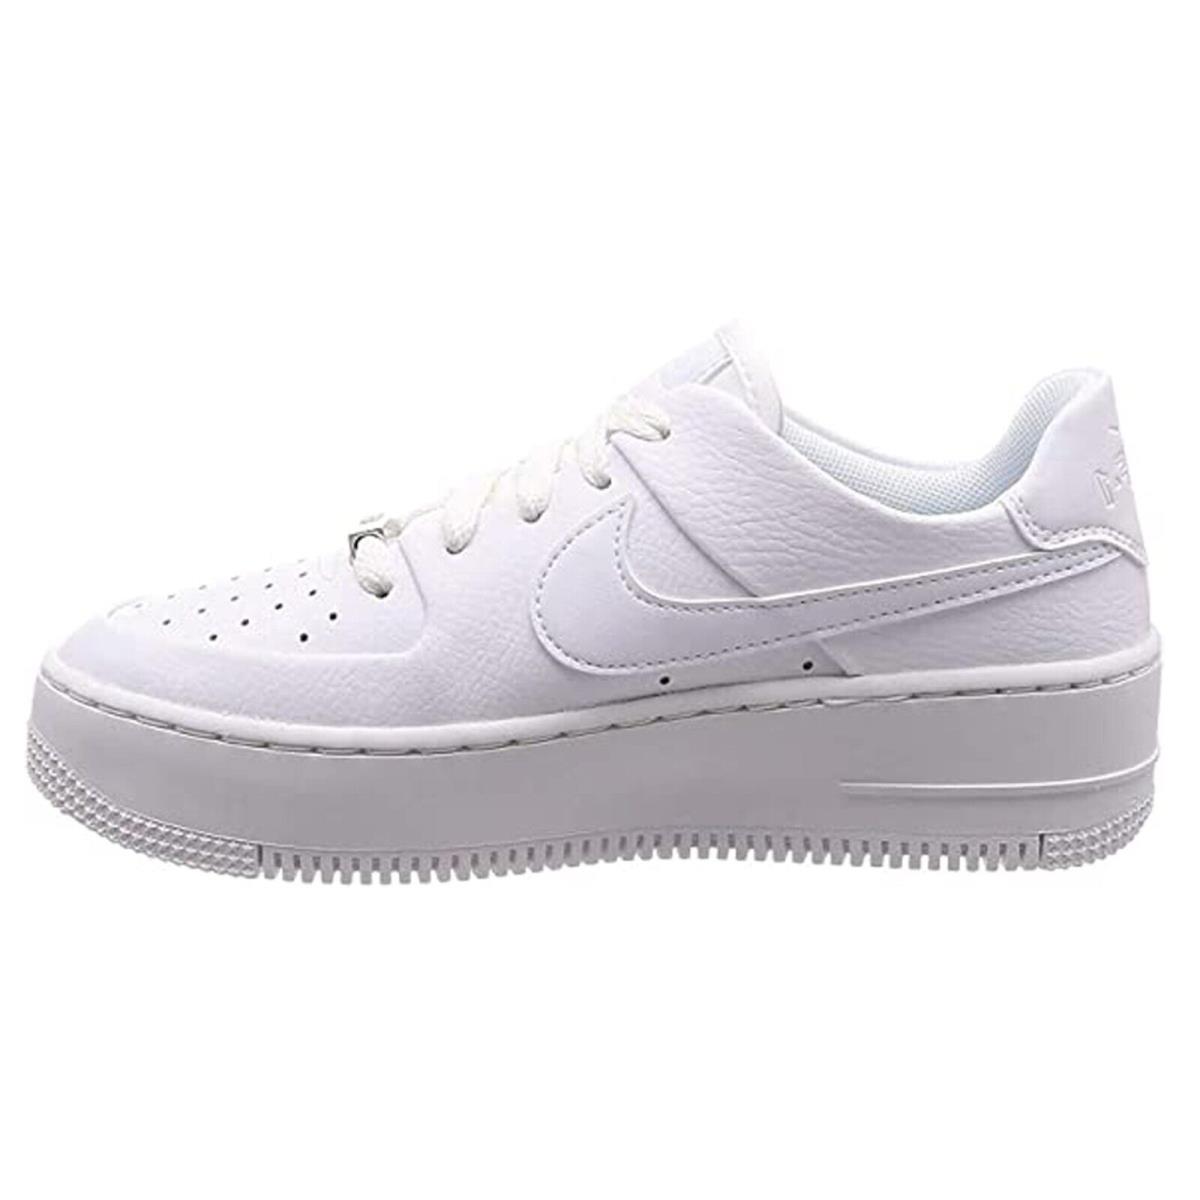 Nike Air Force 1 Sage Low Trainers Women`s Shoe - White